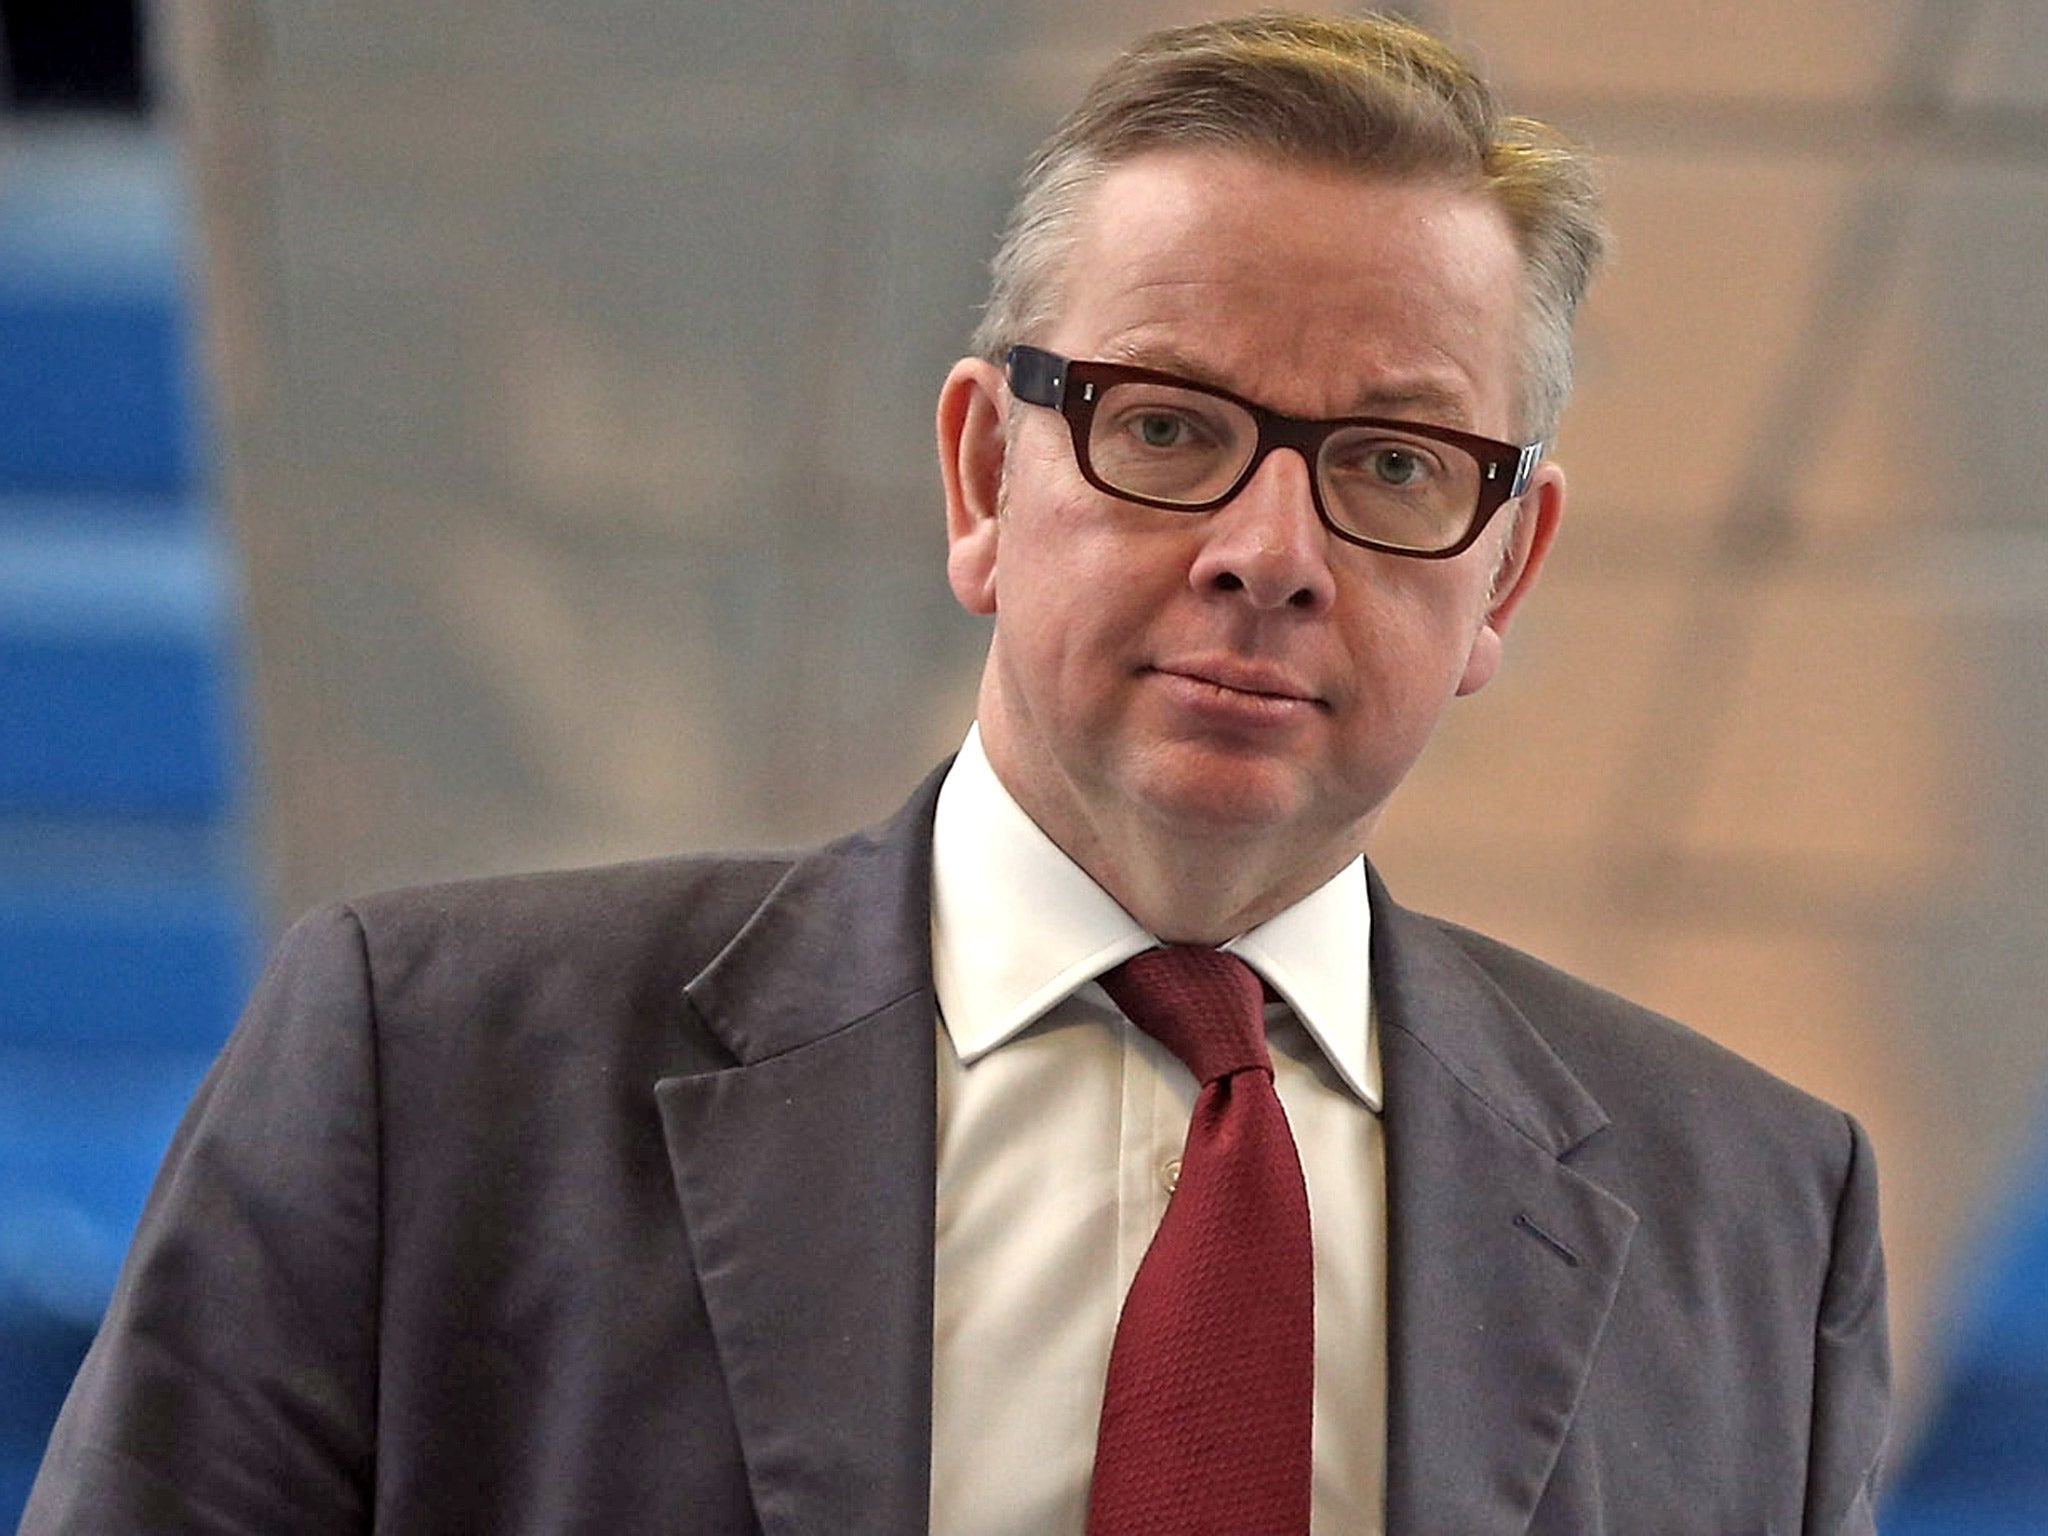 Michael Gove has become the darling of Conservative backbench MPs by imposing traditionalist education reforms with crusading zeal